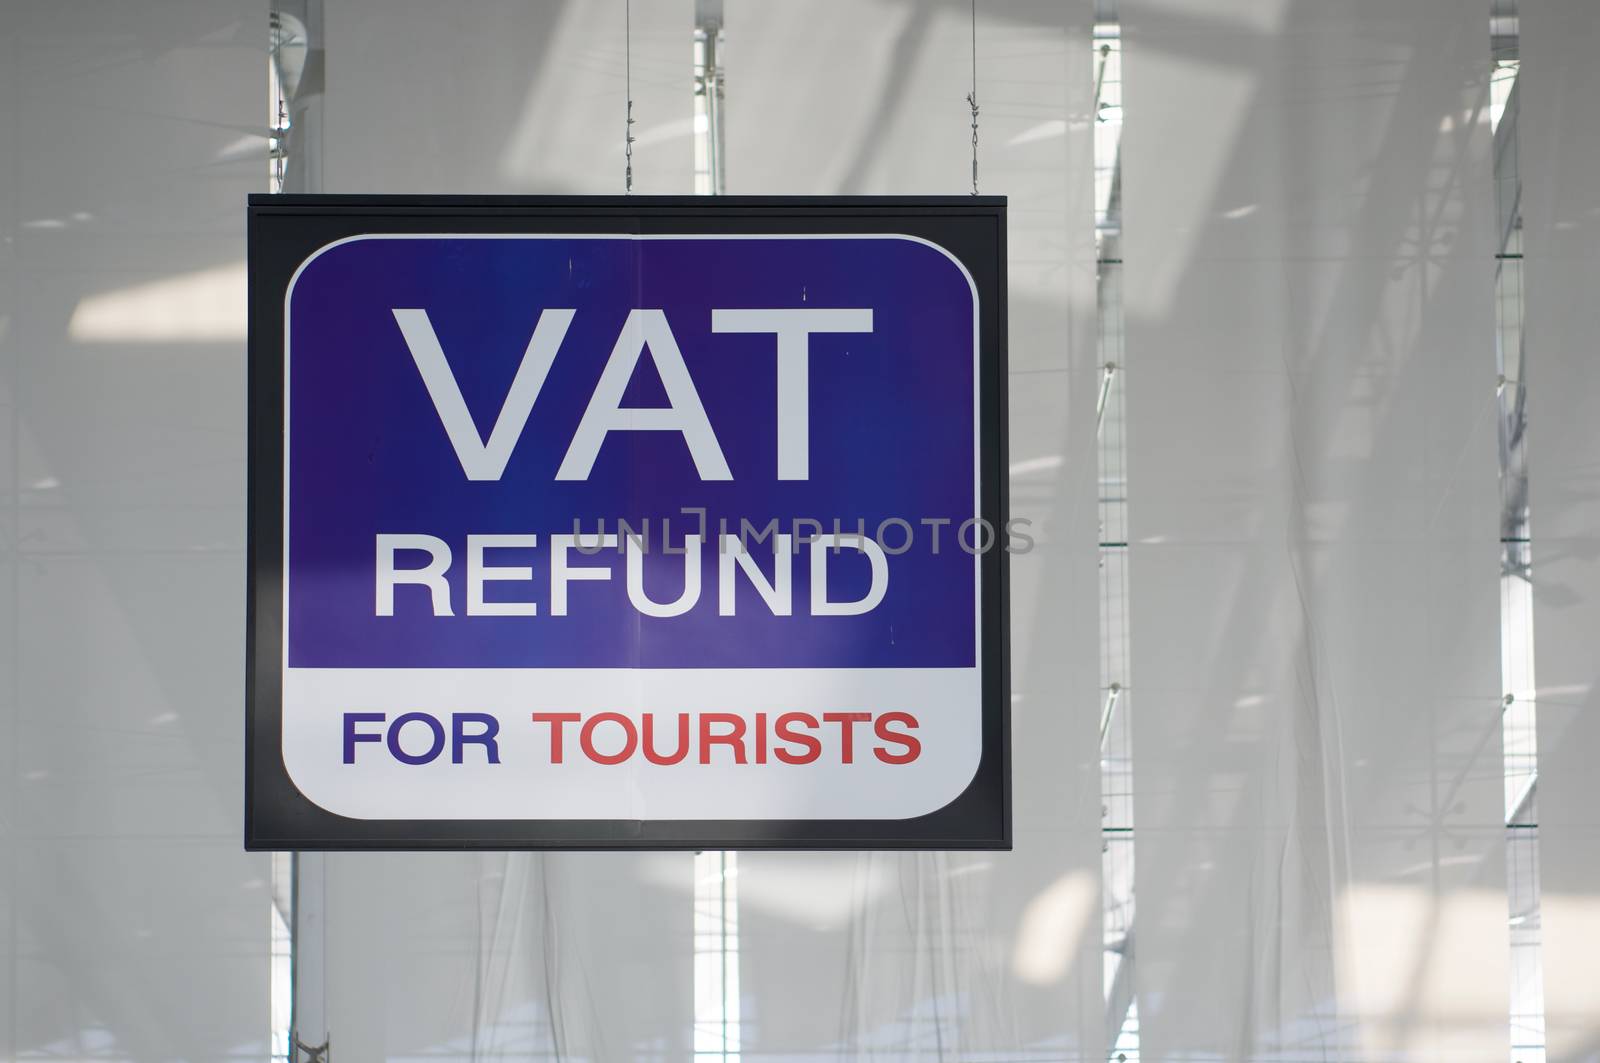 Vat refund for tourists information board sign at international airport by eaglesky